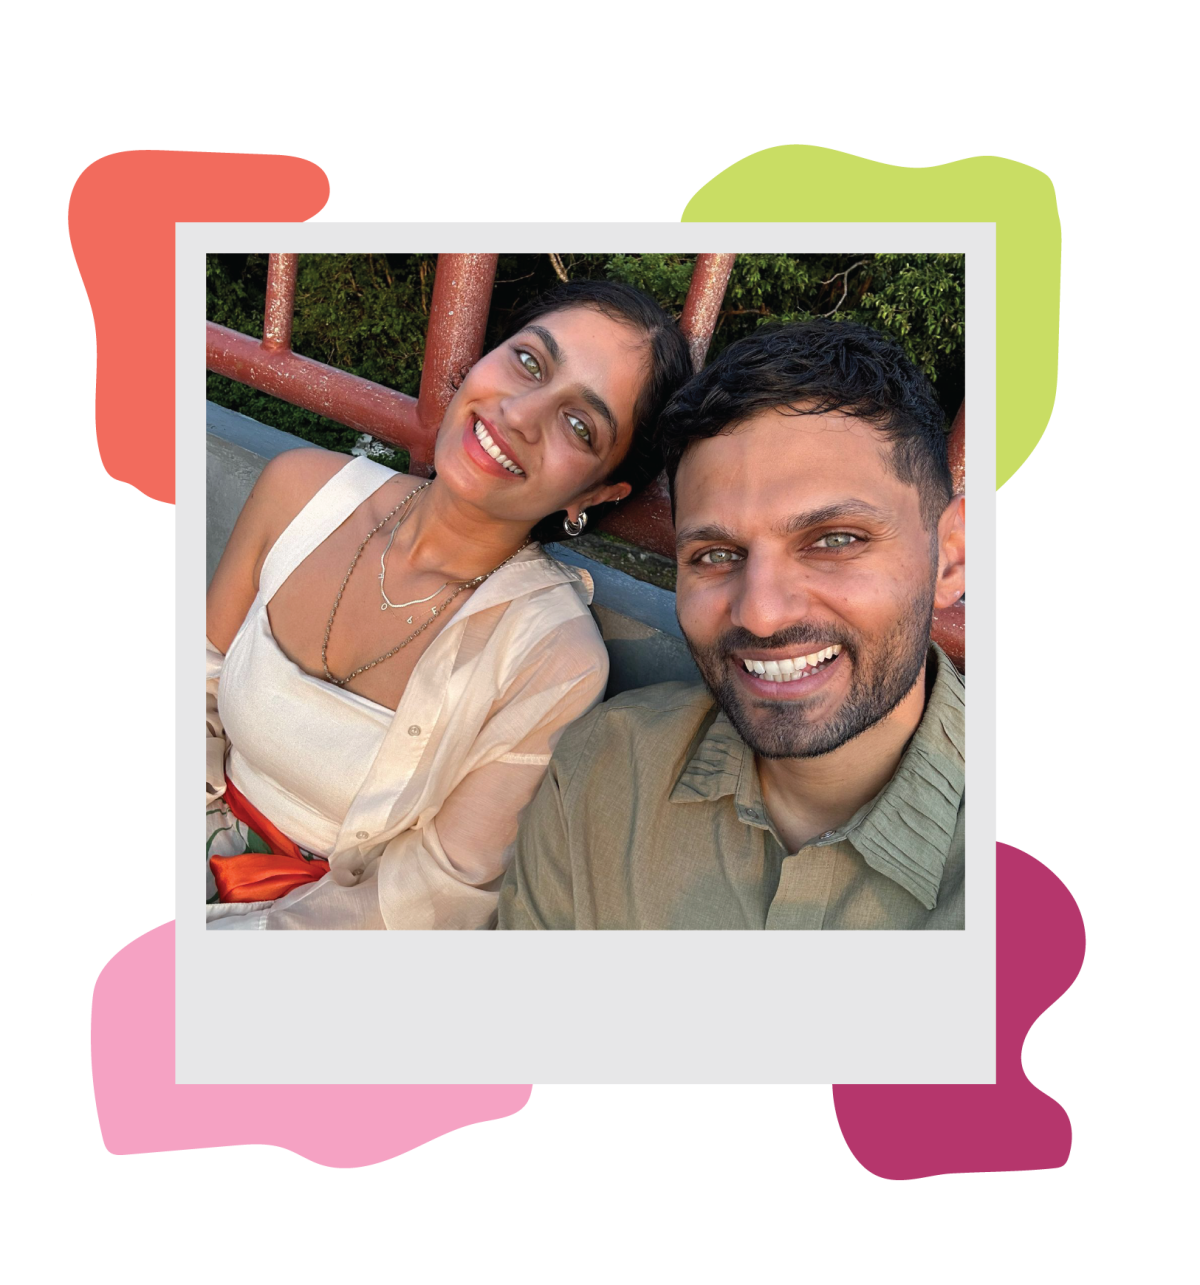 Photo illustration in shape of Polaroid photo of a man and woman smiling, with colorful shapes at the corners.